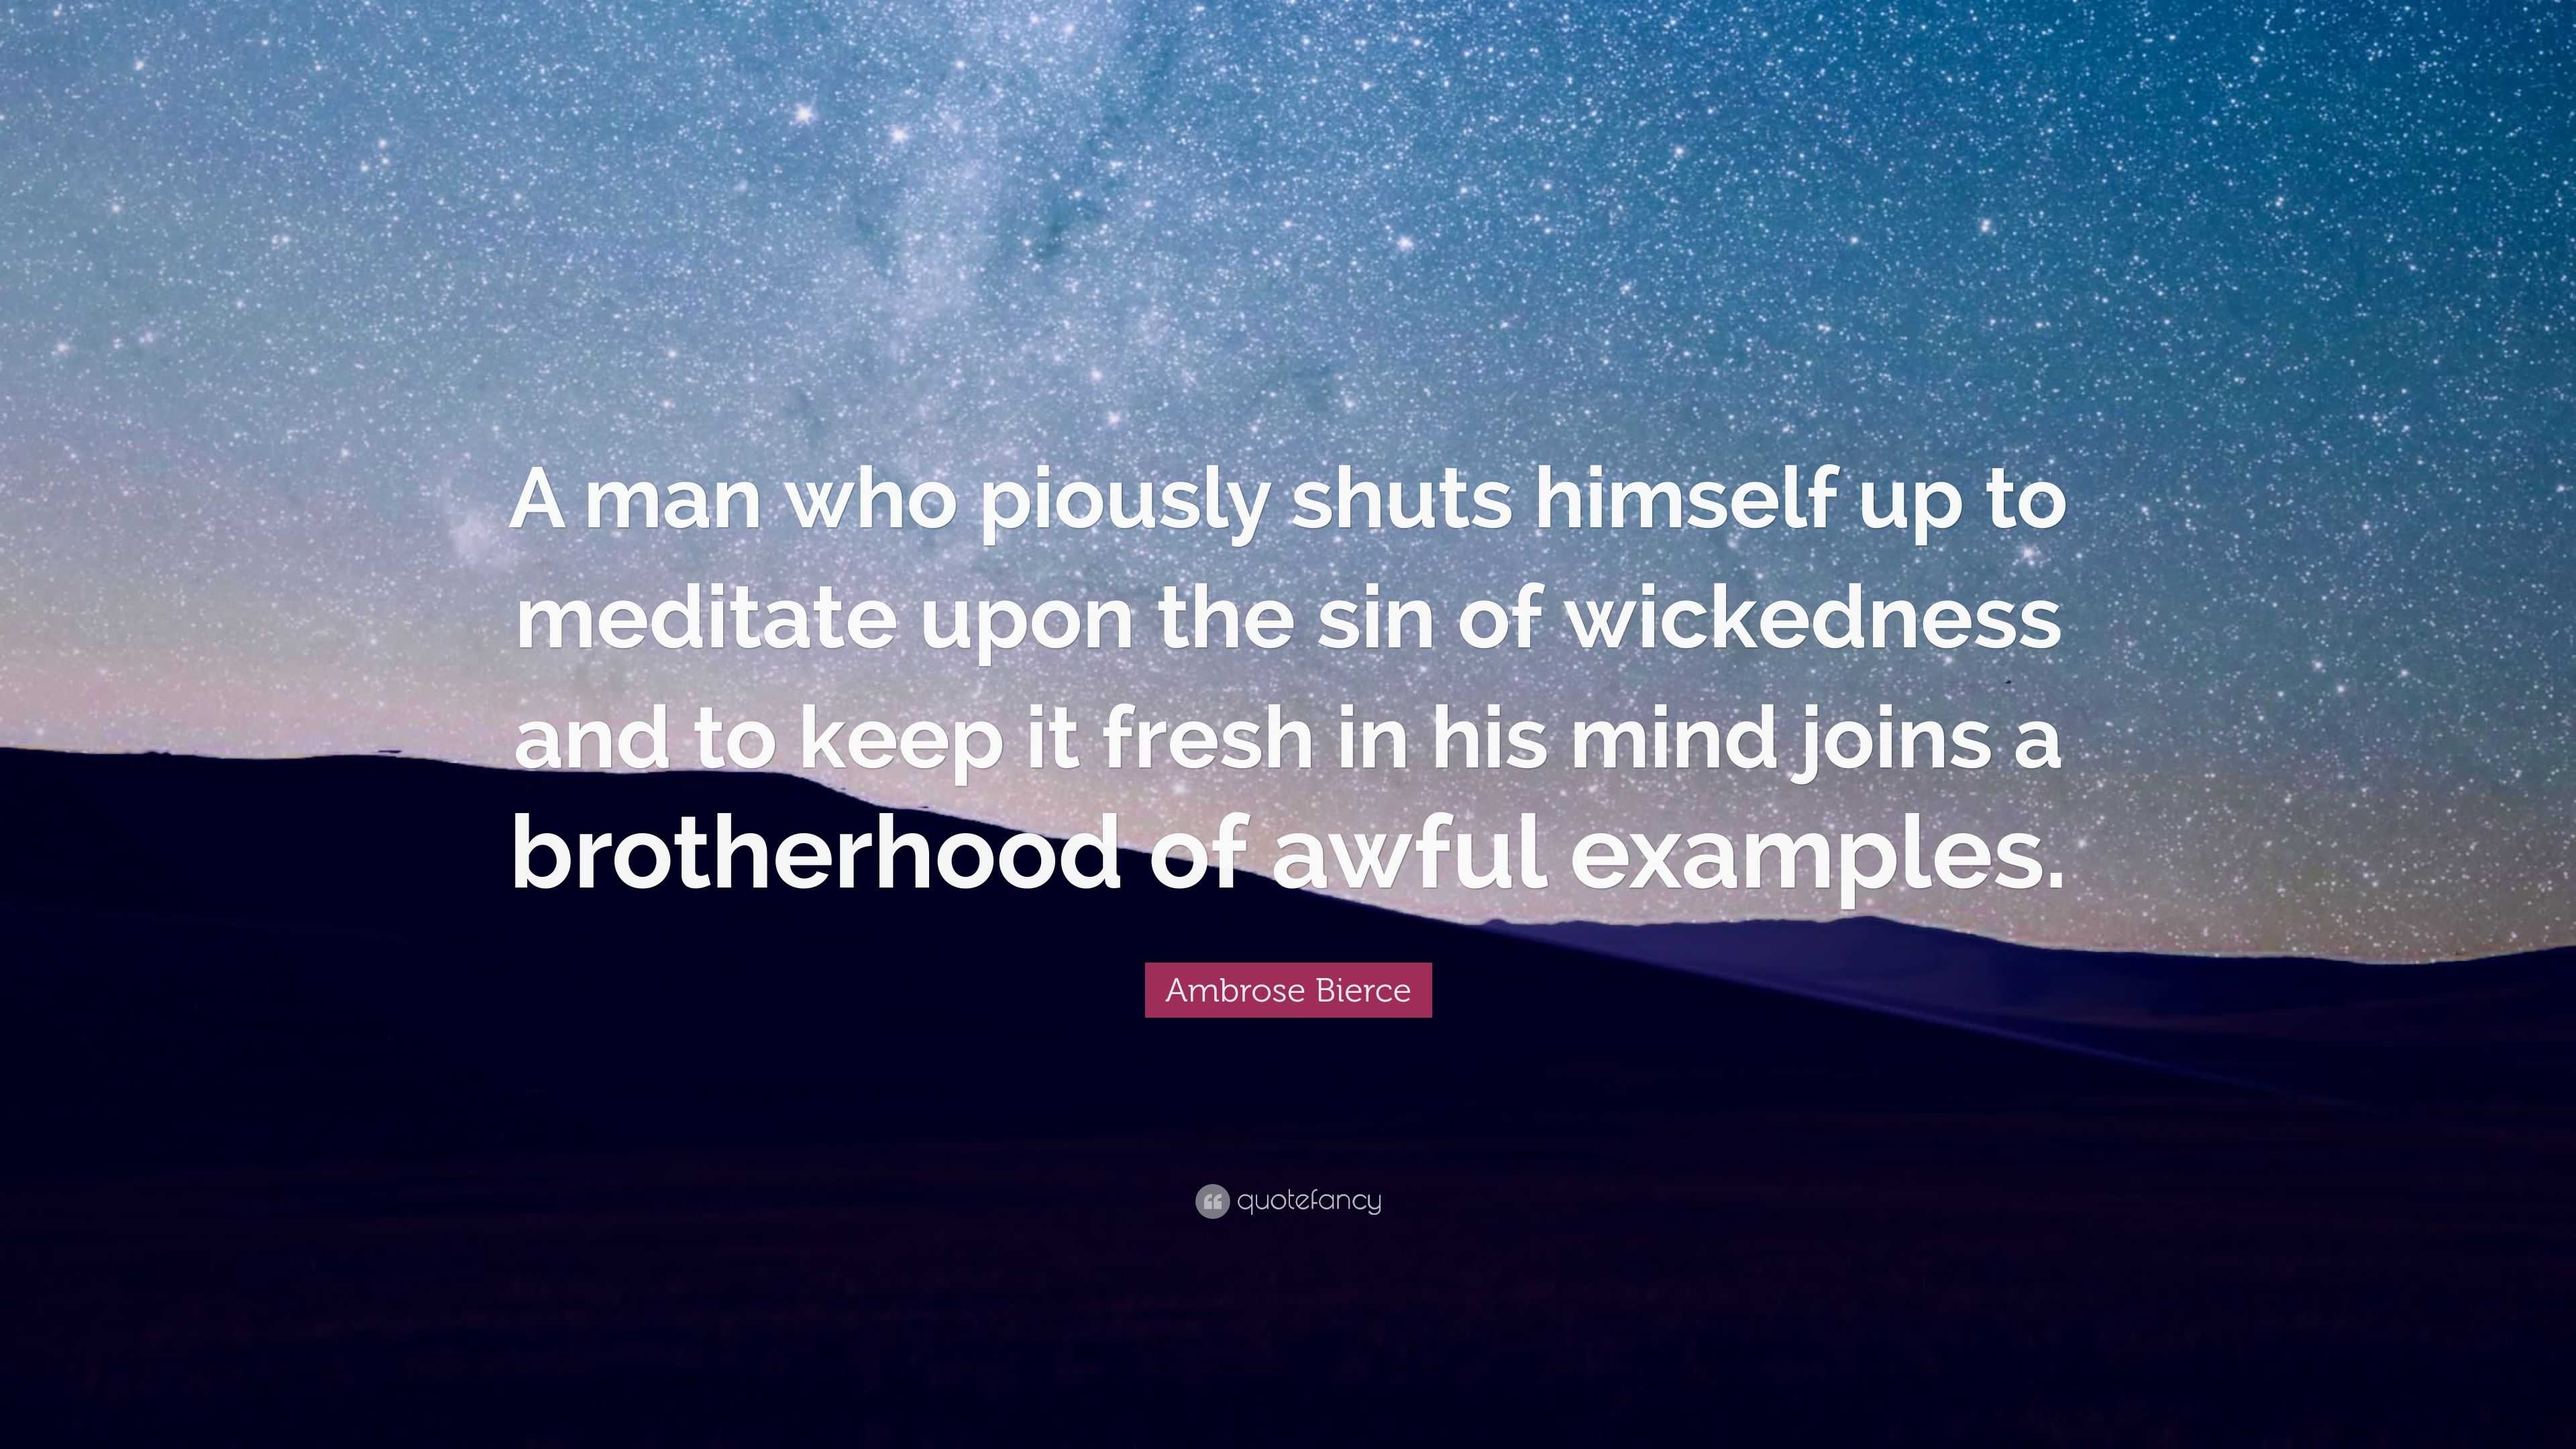 Ambrose Bierce Quote: “A man who piously shuts himself up to meditate ...